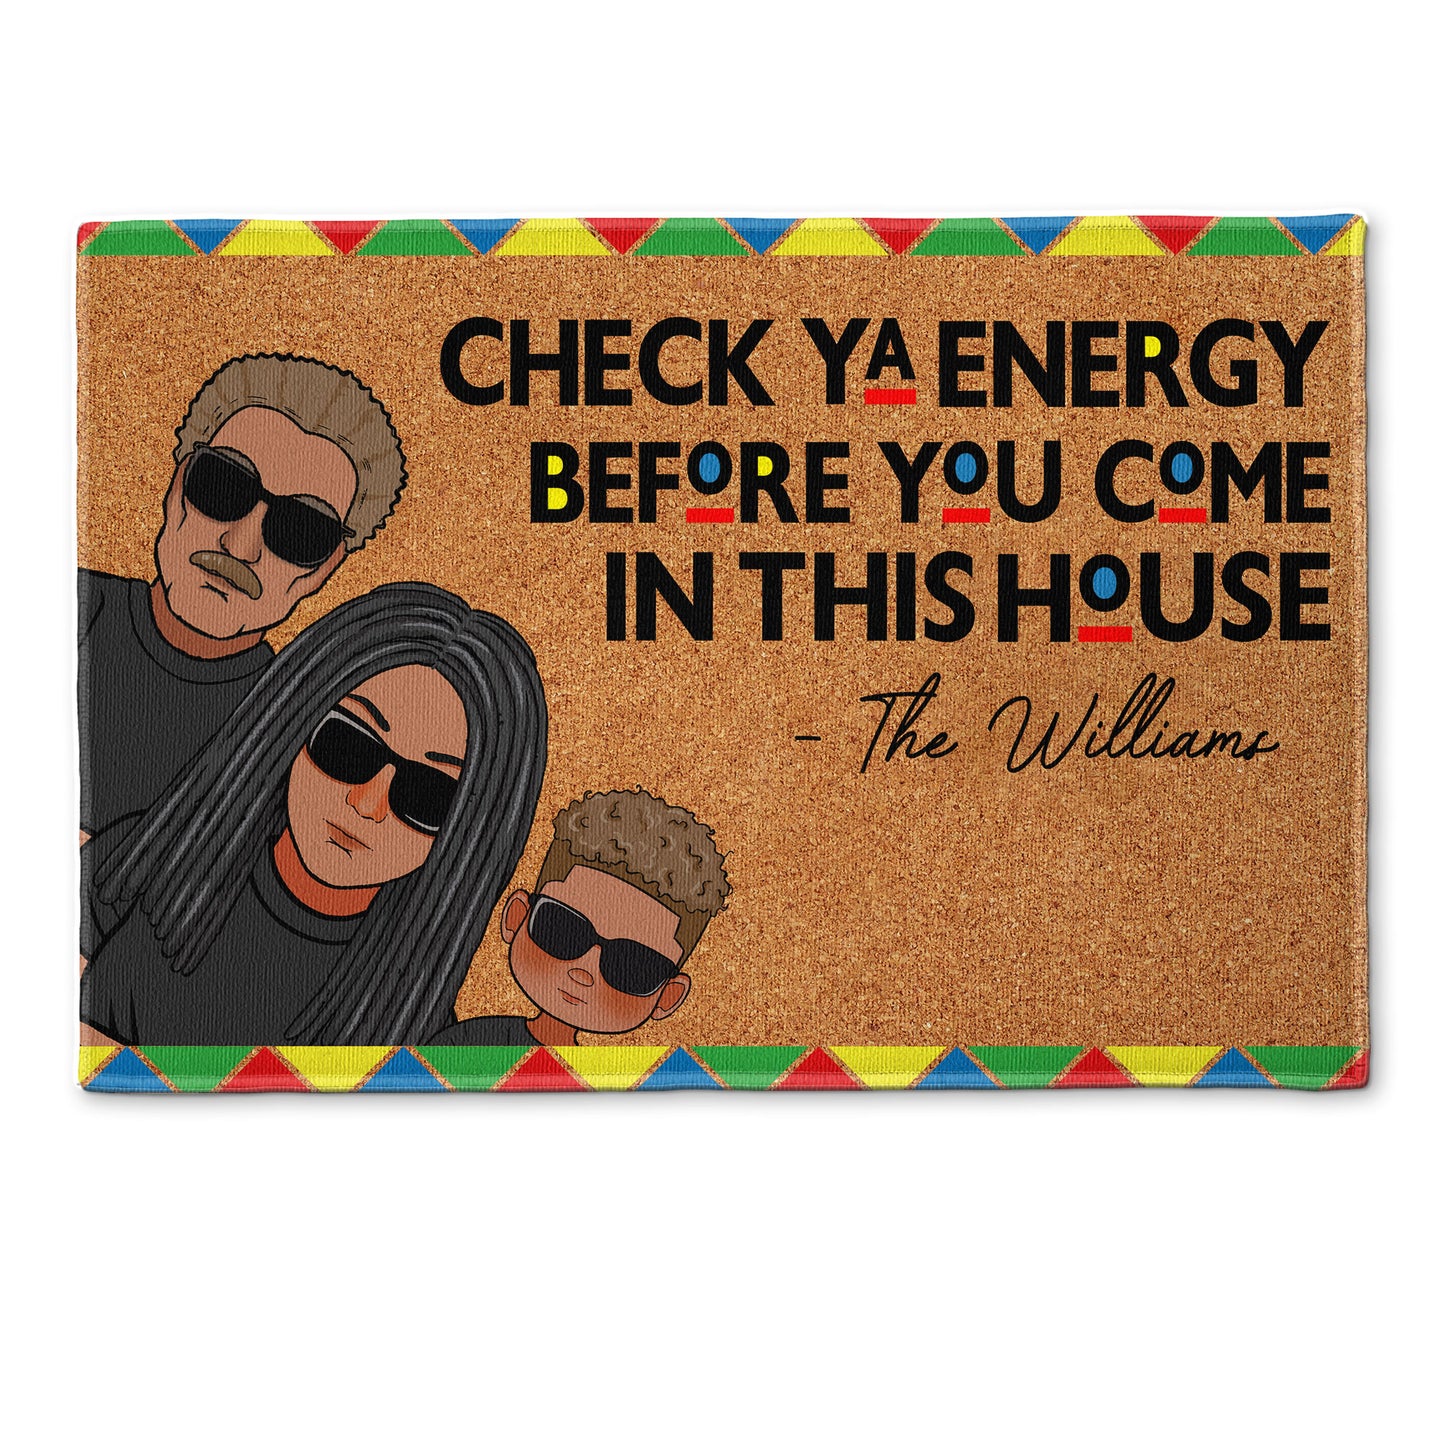 Check Ya Energy Before You Come In This House - Personalized Doormat - Birthday, Loving, Funny, Home Decor Gift For Family, Sisters, Brothers, Siblings, Family Members